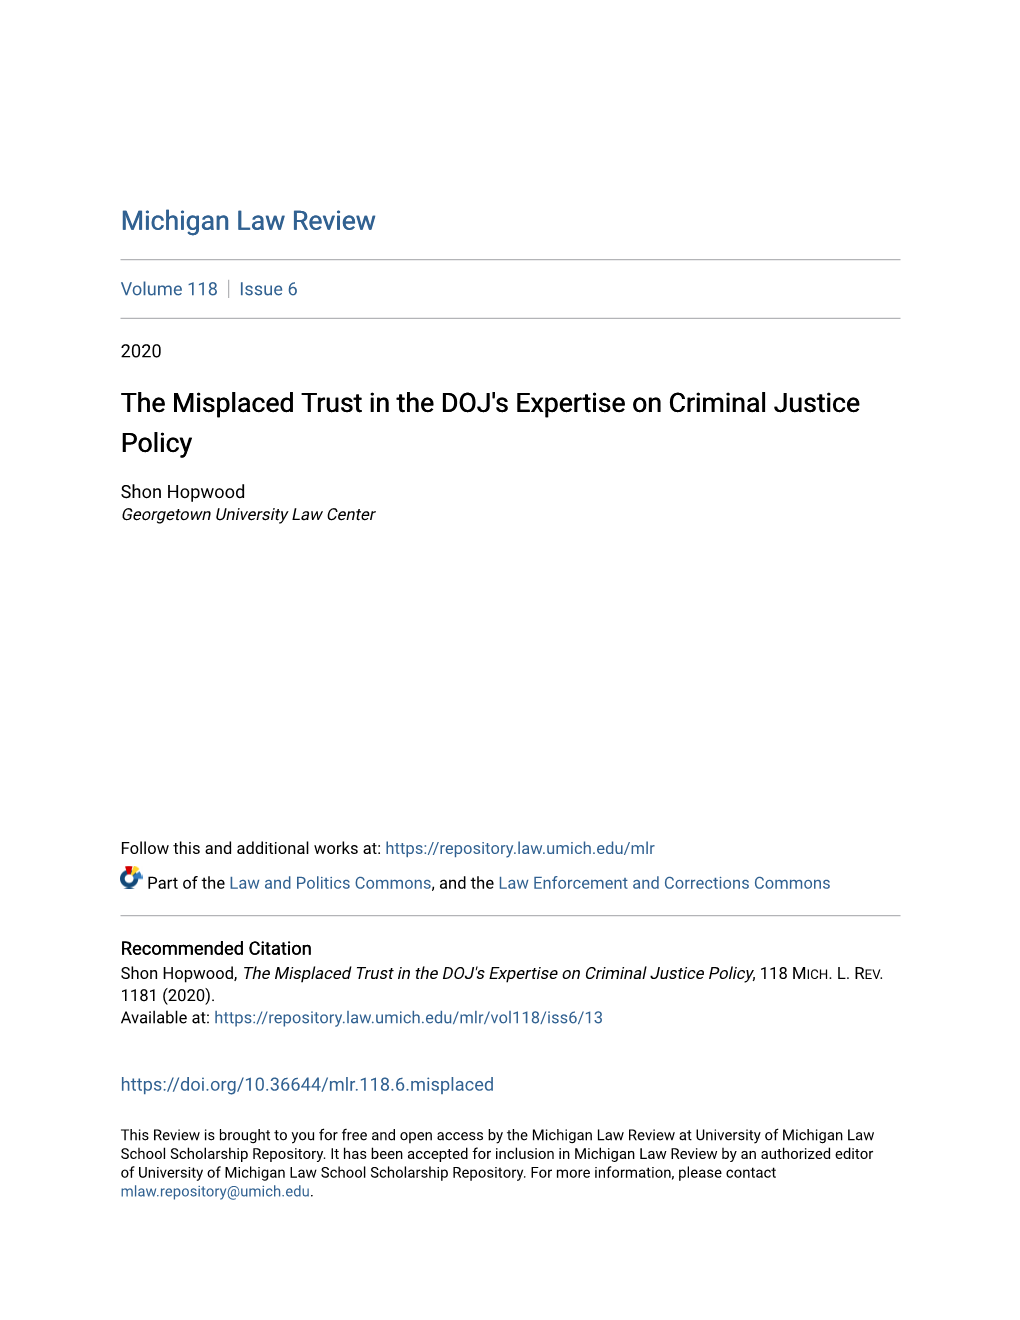 The Misplaced Trust in the DOJ's Expertise on Criminal Justice Policy